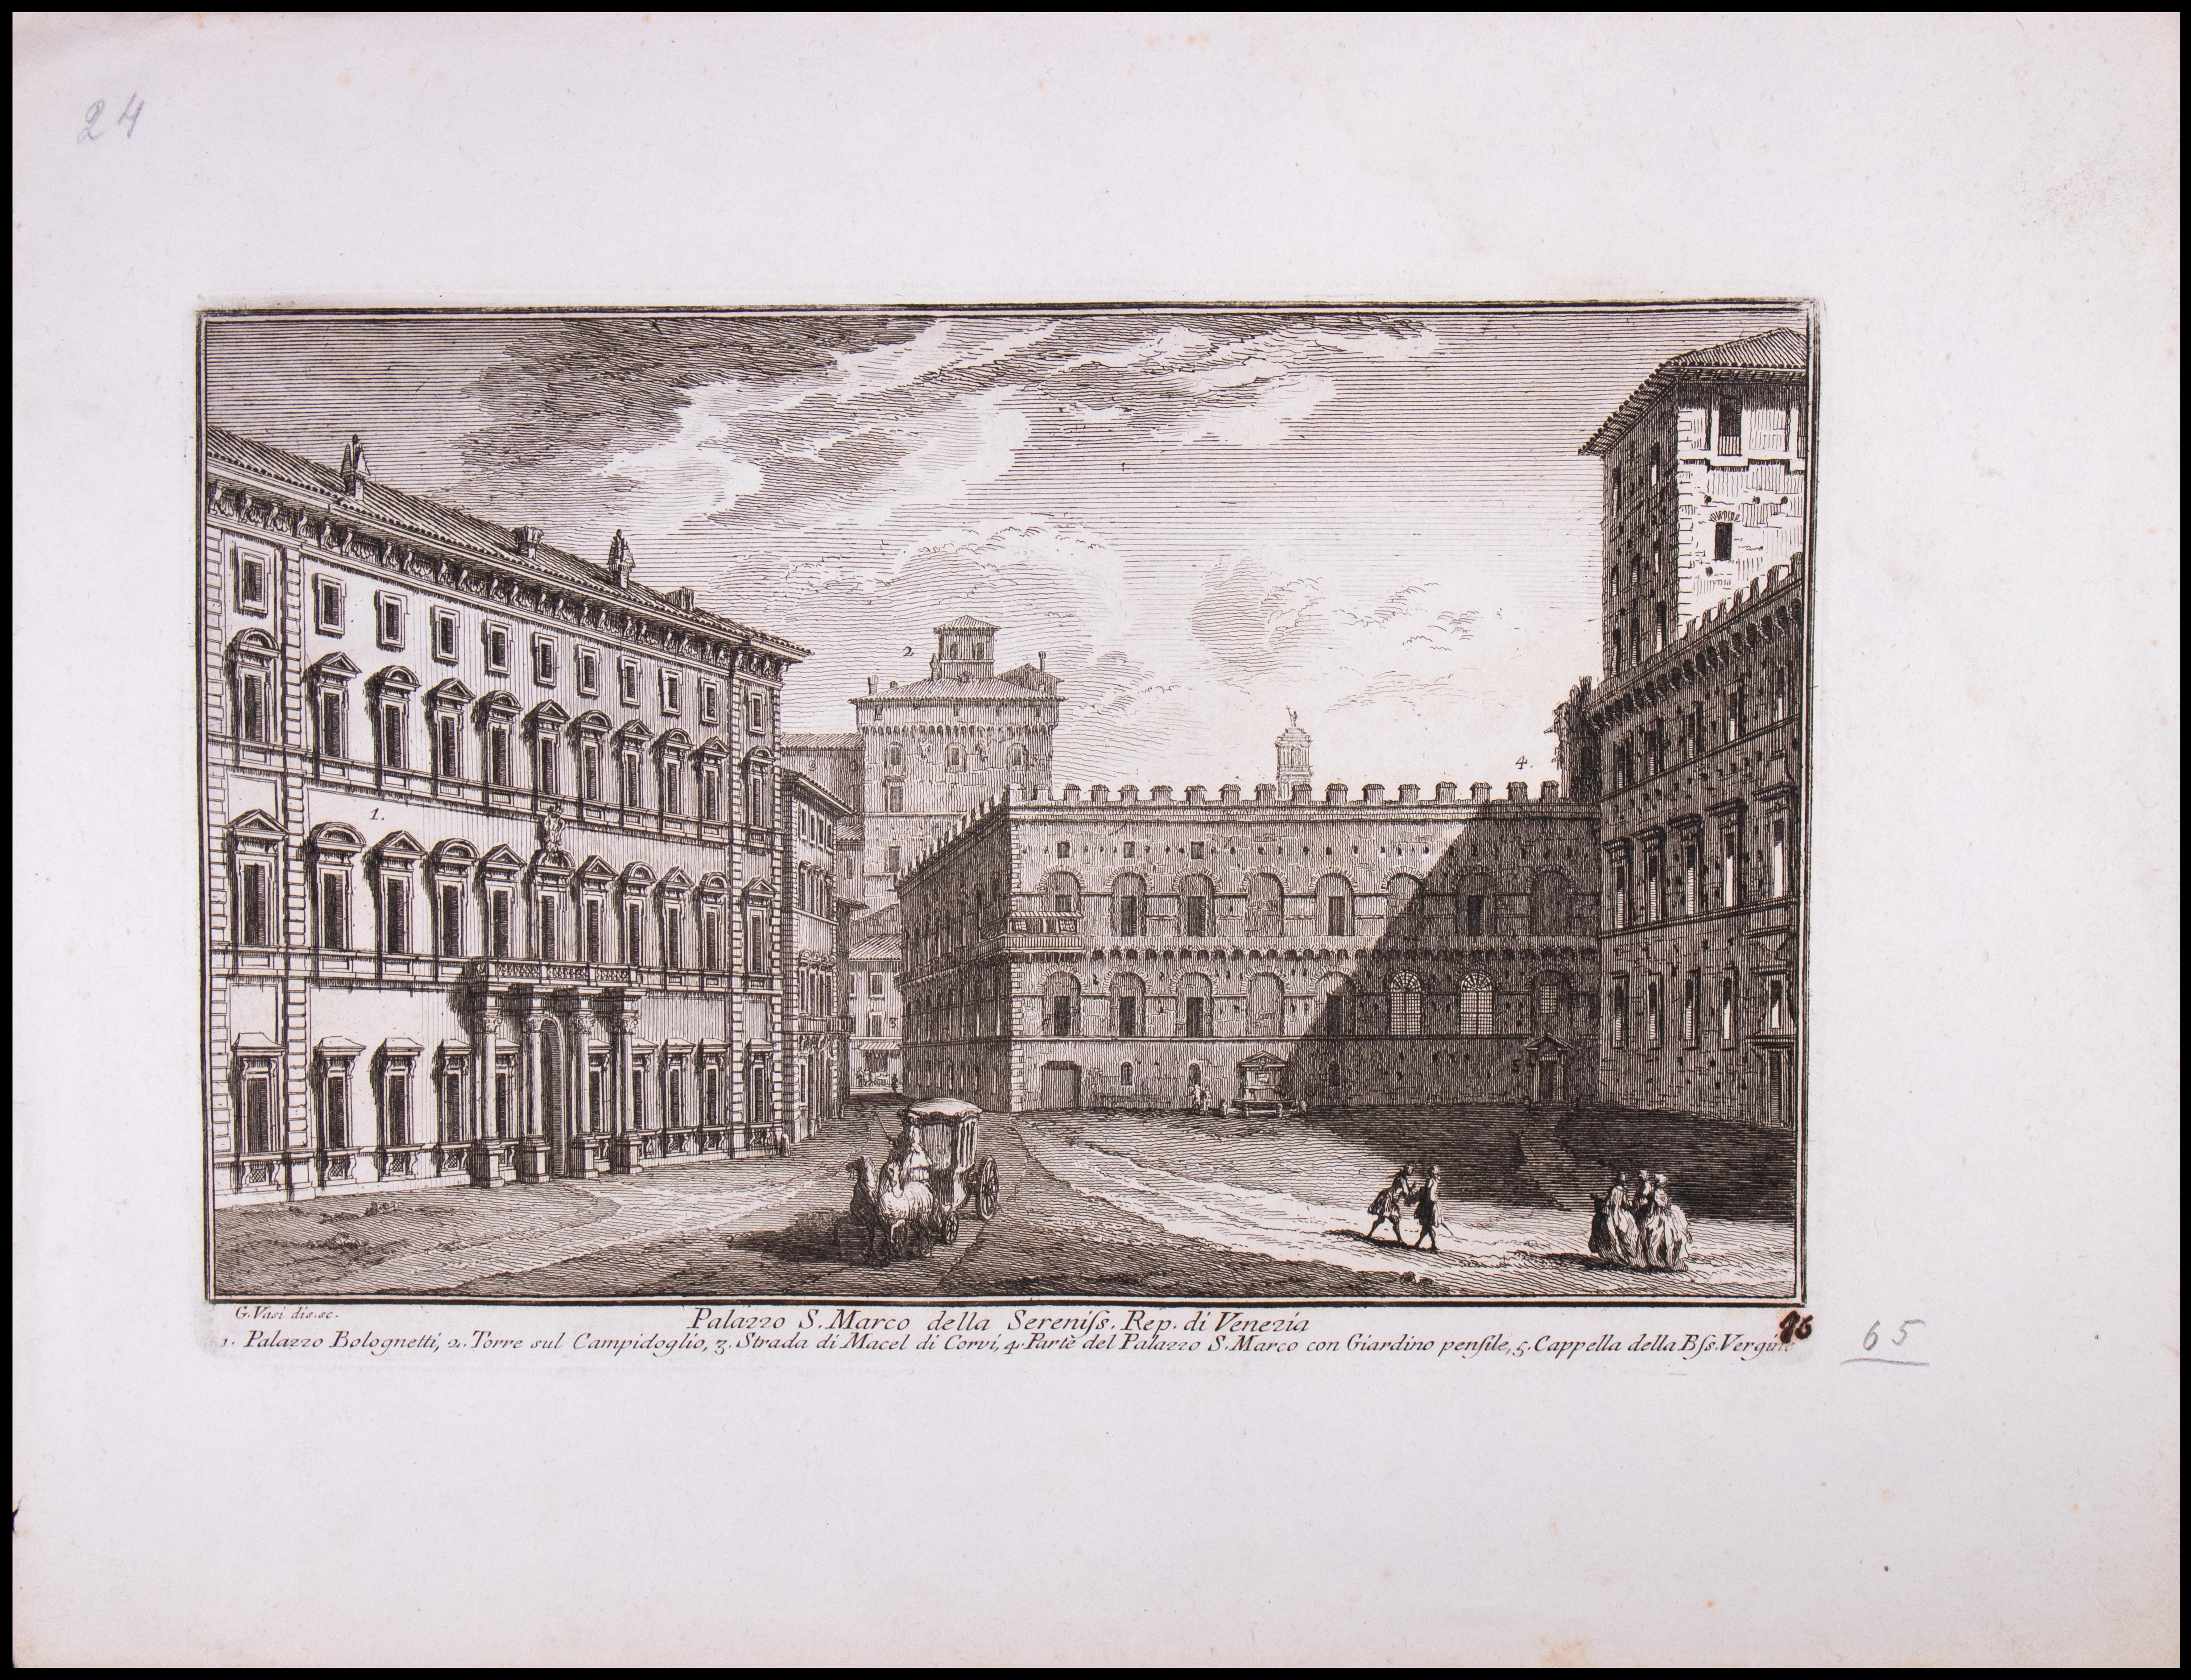 Palazzo S.Marco della Sereniss. Rep. di Venezia is an etching of the Late 18th century realized by Giuseppe Vasi.

Signed and titled on plate lower margin. 

Good conditions except for consumed margins with some foxings.

Giuseppe Vasi 